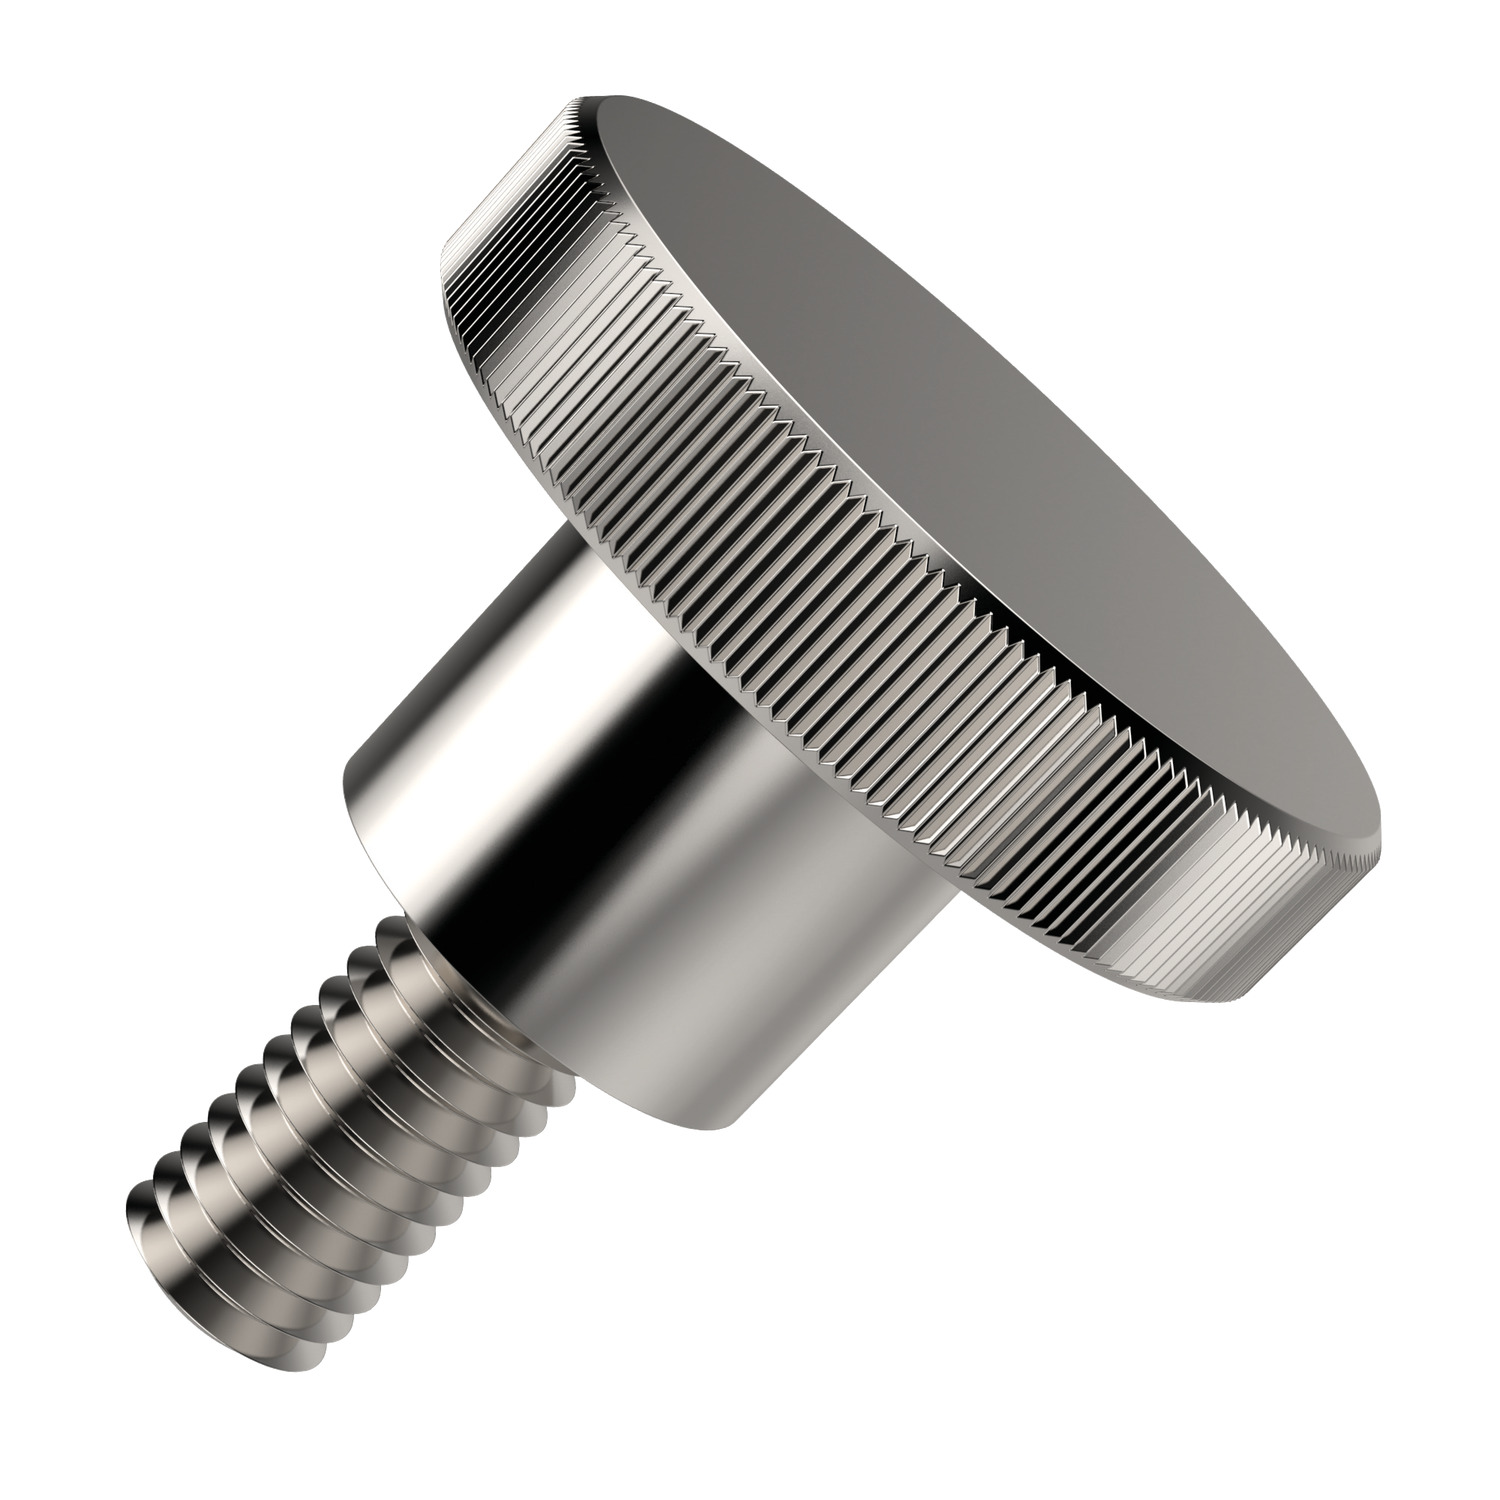 Product P0400.A2, Knurled Thumb Screws stainless steel - DIN 464 / 